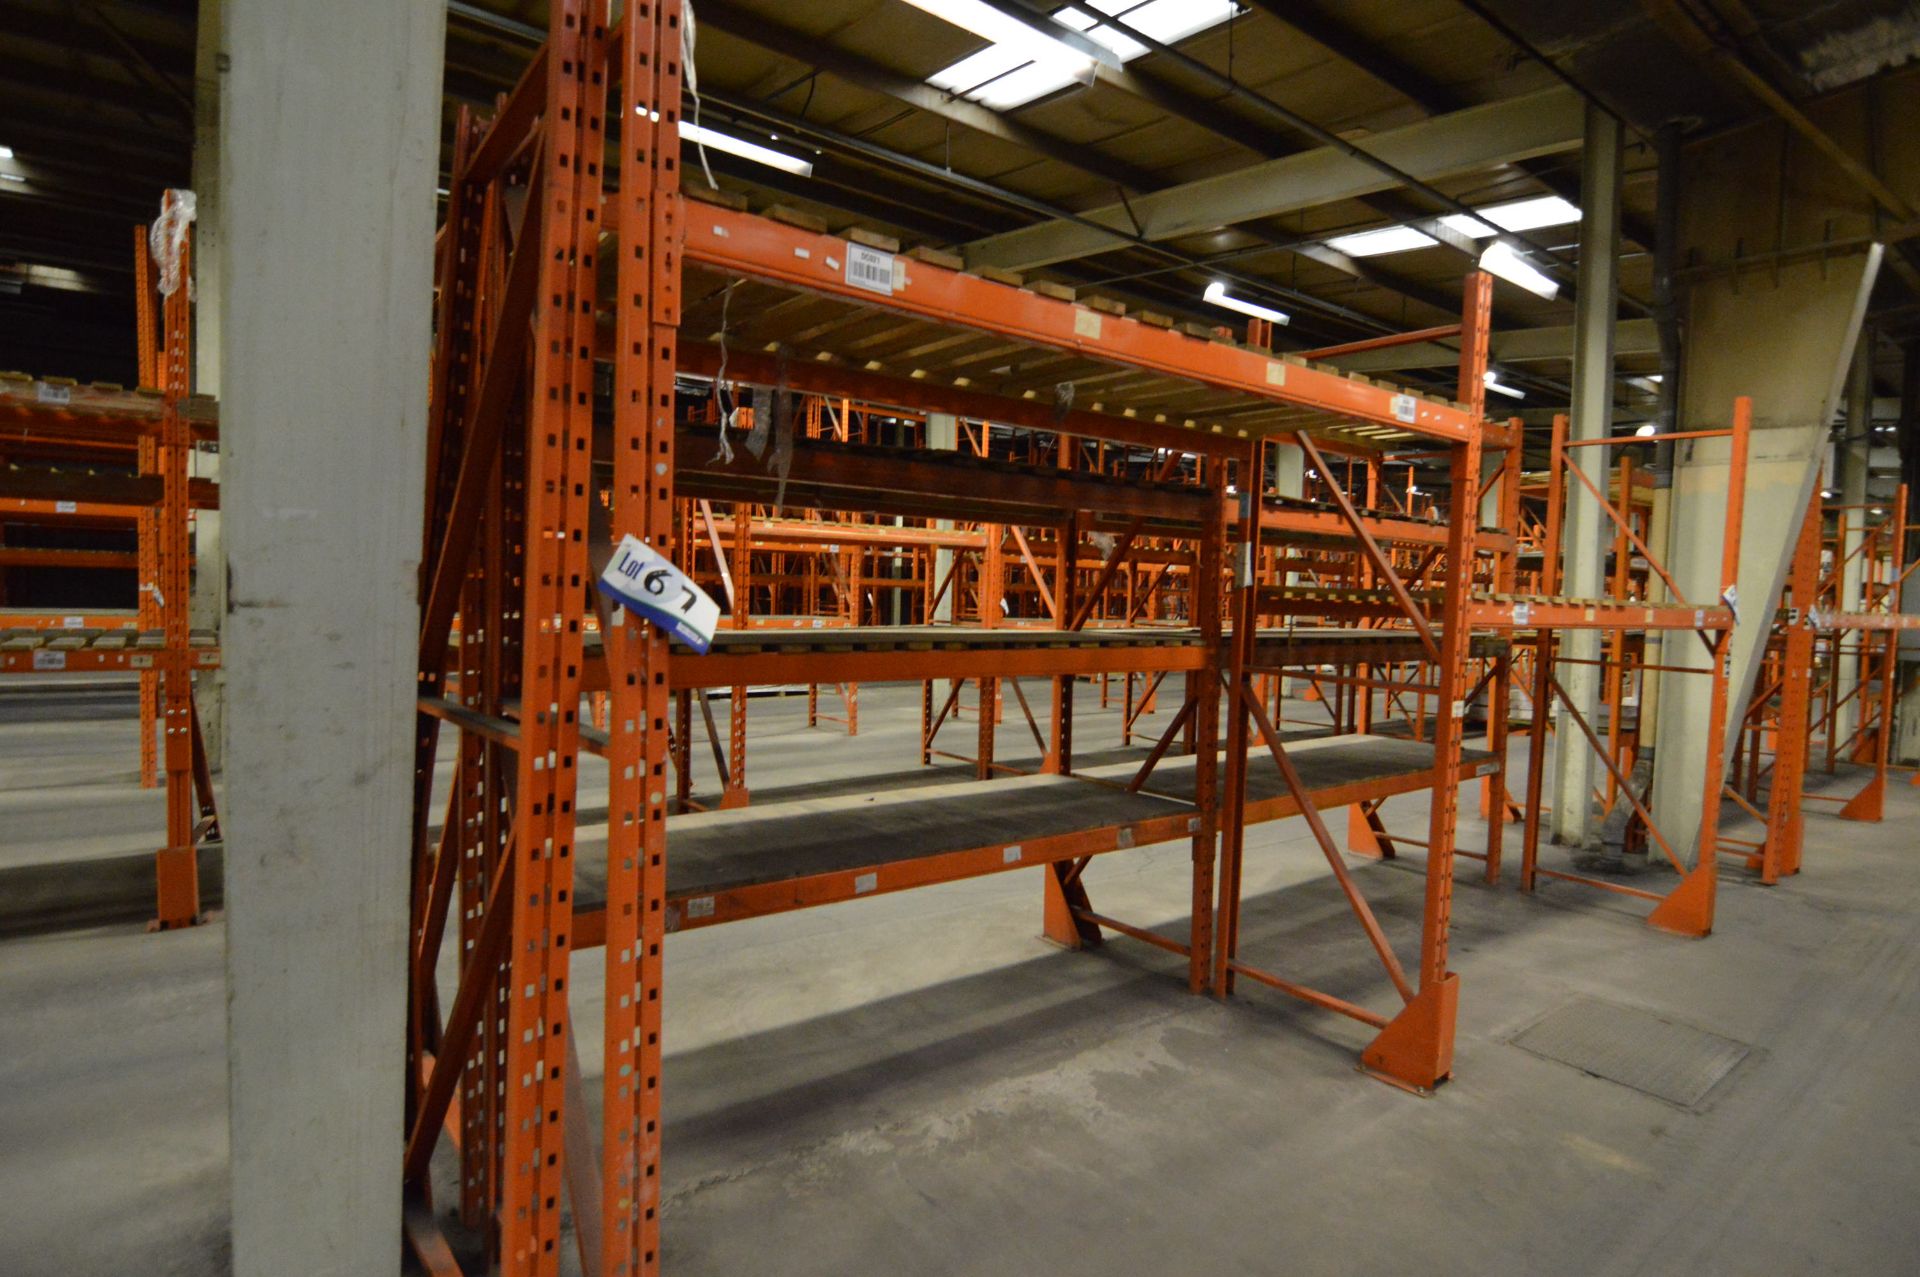 Redirack SD1.70 Single Sided Two Bay Single Tier Pallet Rack, approx. 5.5m long x 900mm x 2.7m high, - Image 2 of 2